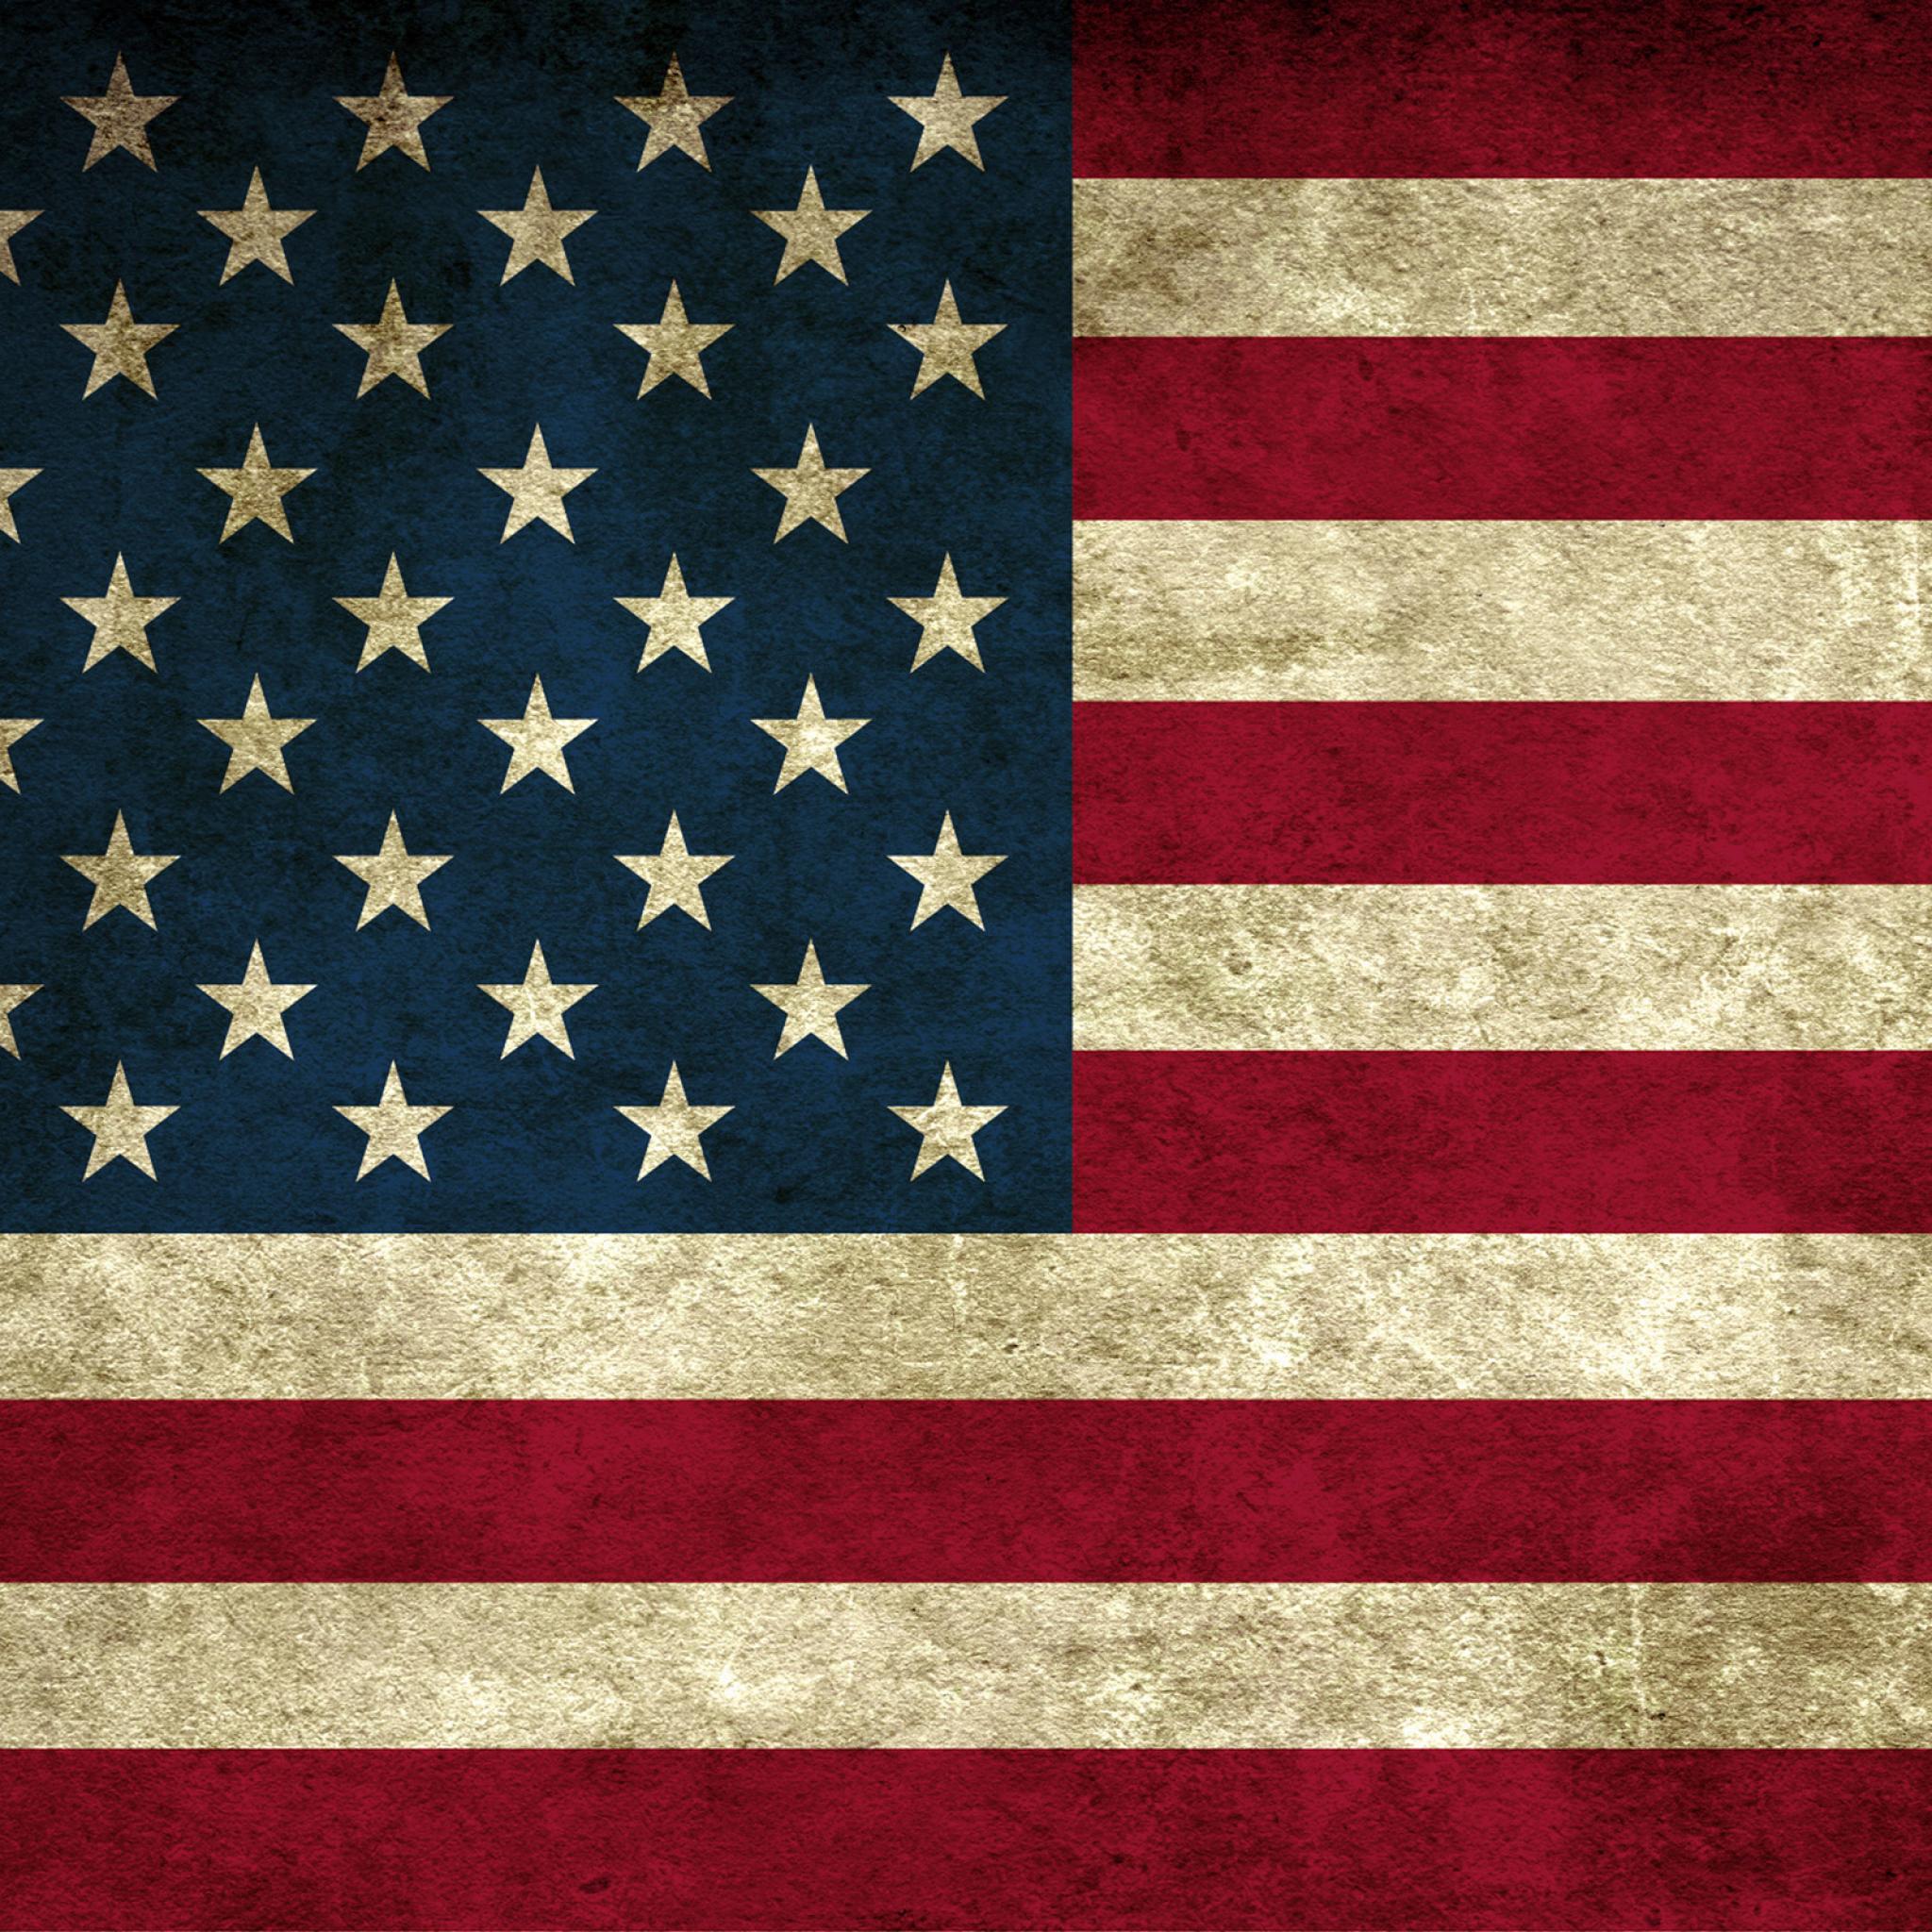 Flag HD Wallpaper For Desktop iPhone iPad And Android